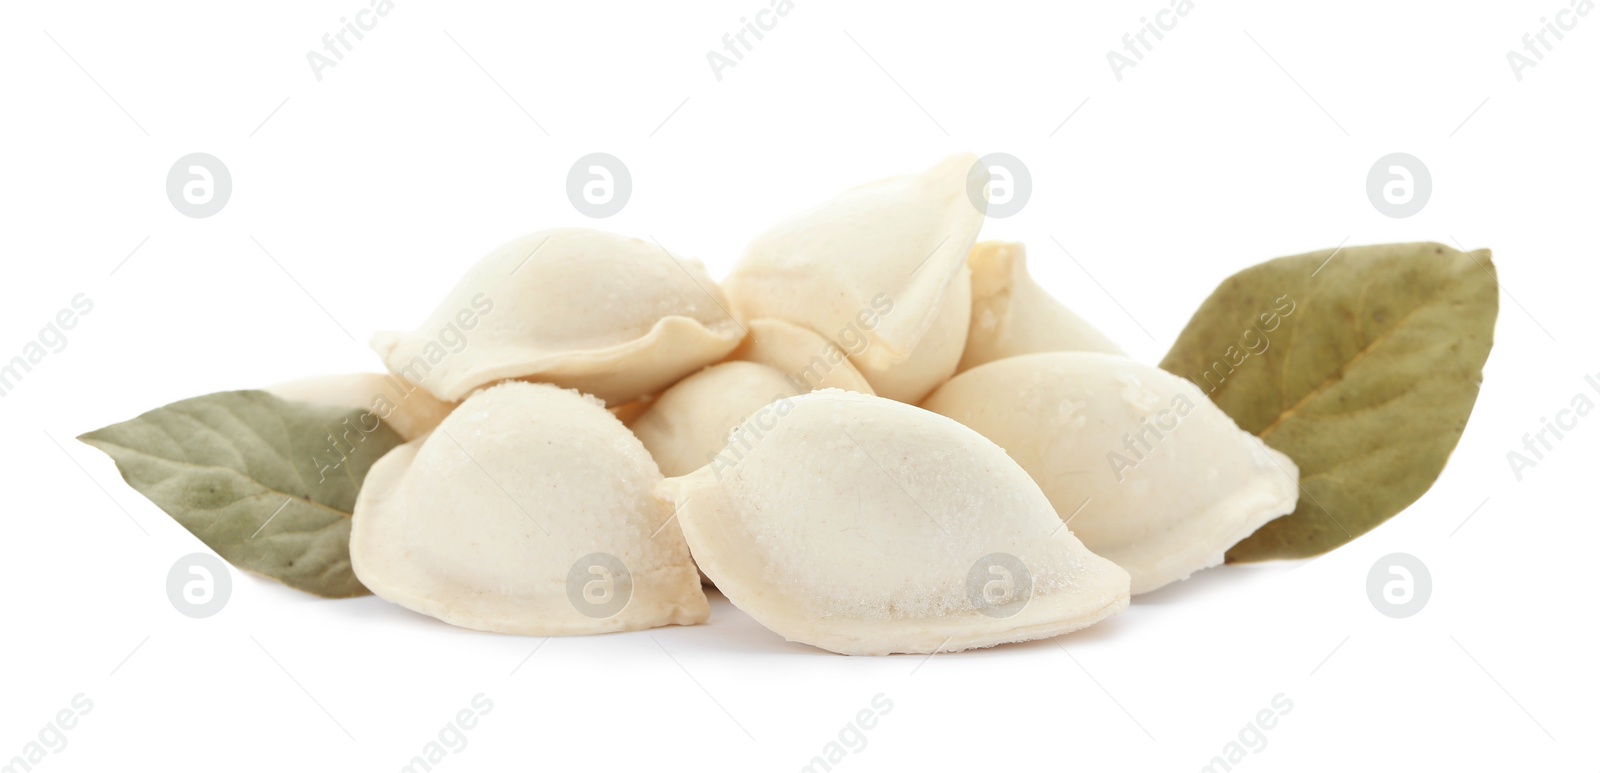 Photo of Raw dumplings with bay leaves on white background